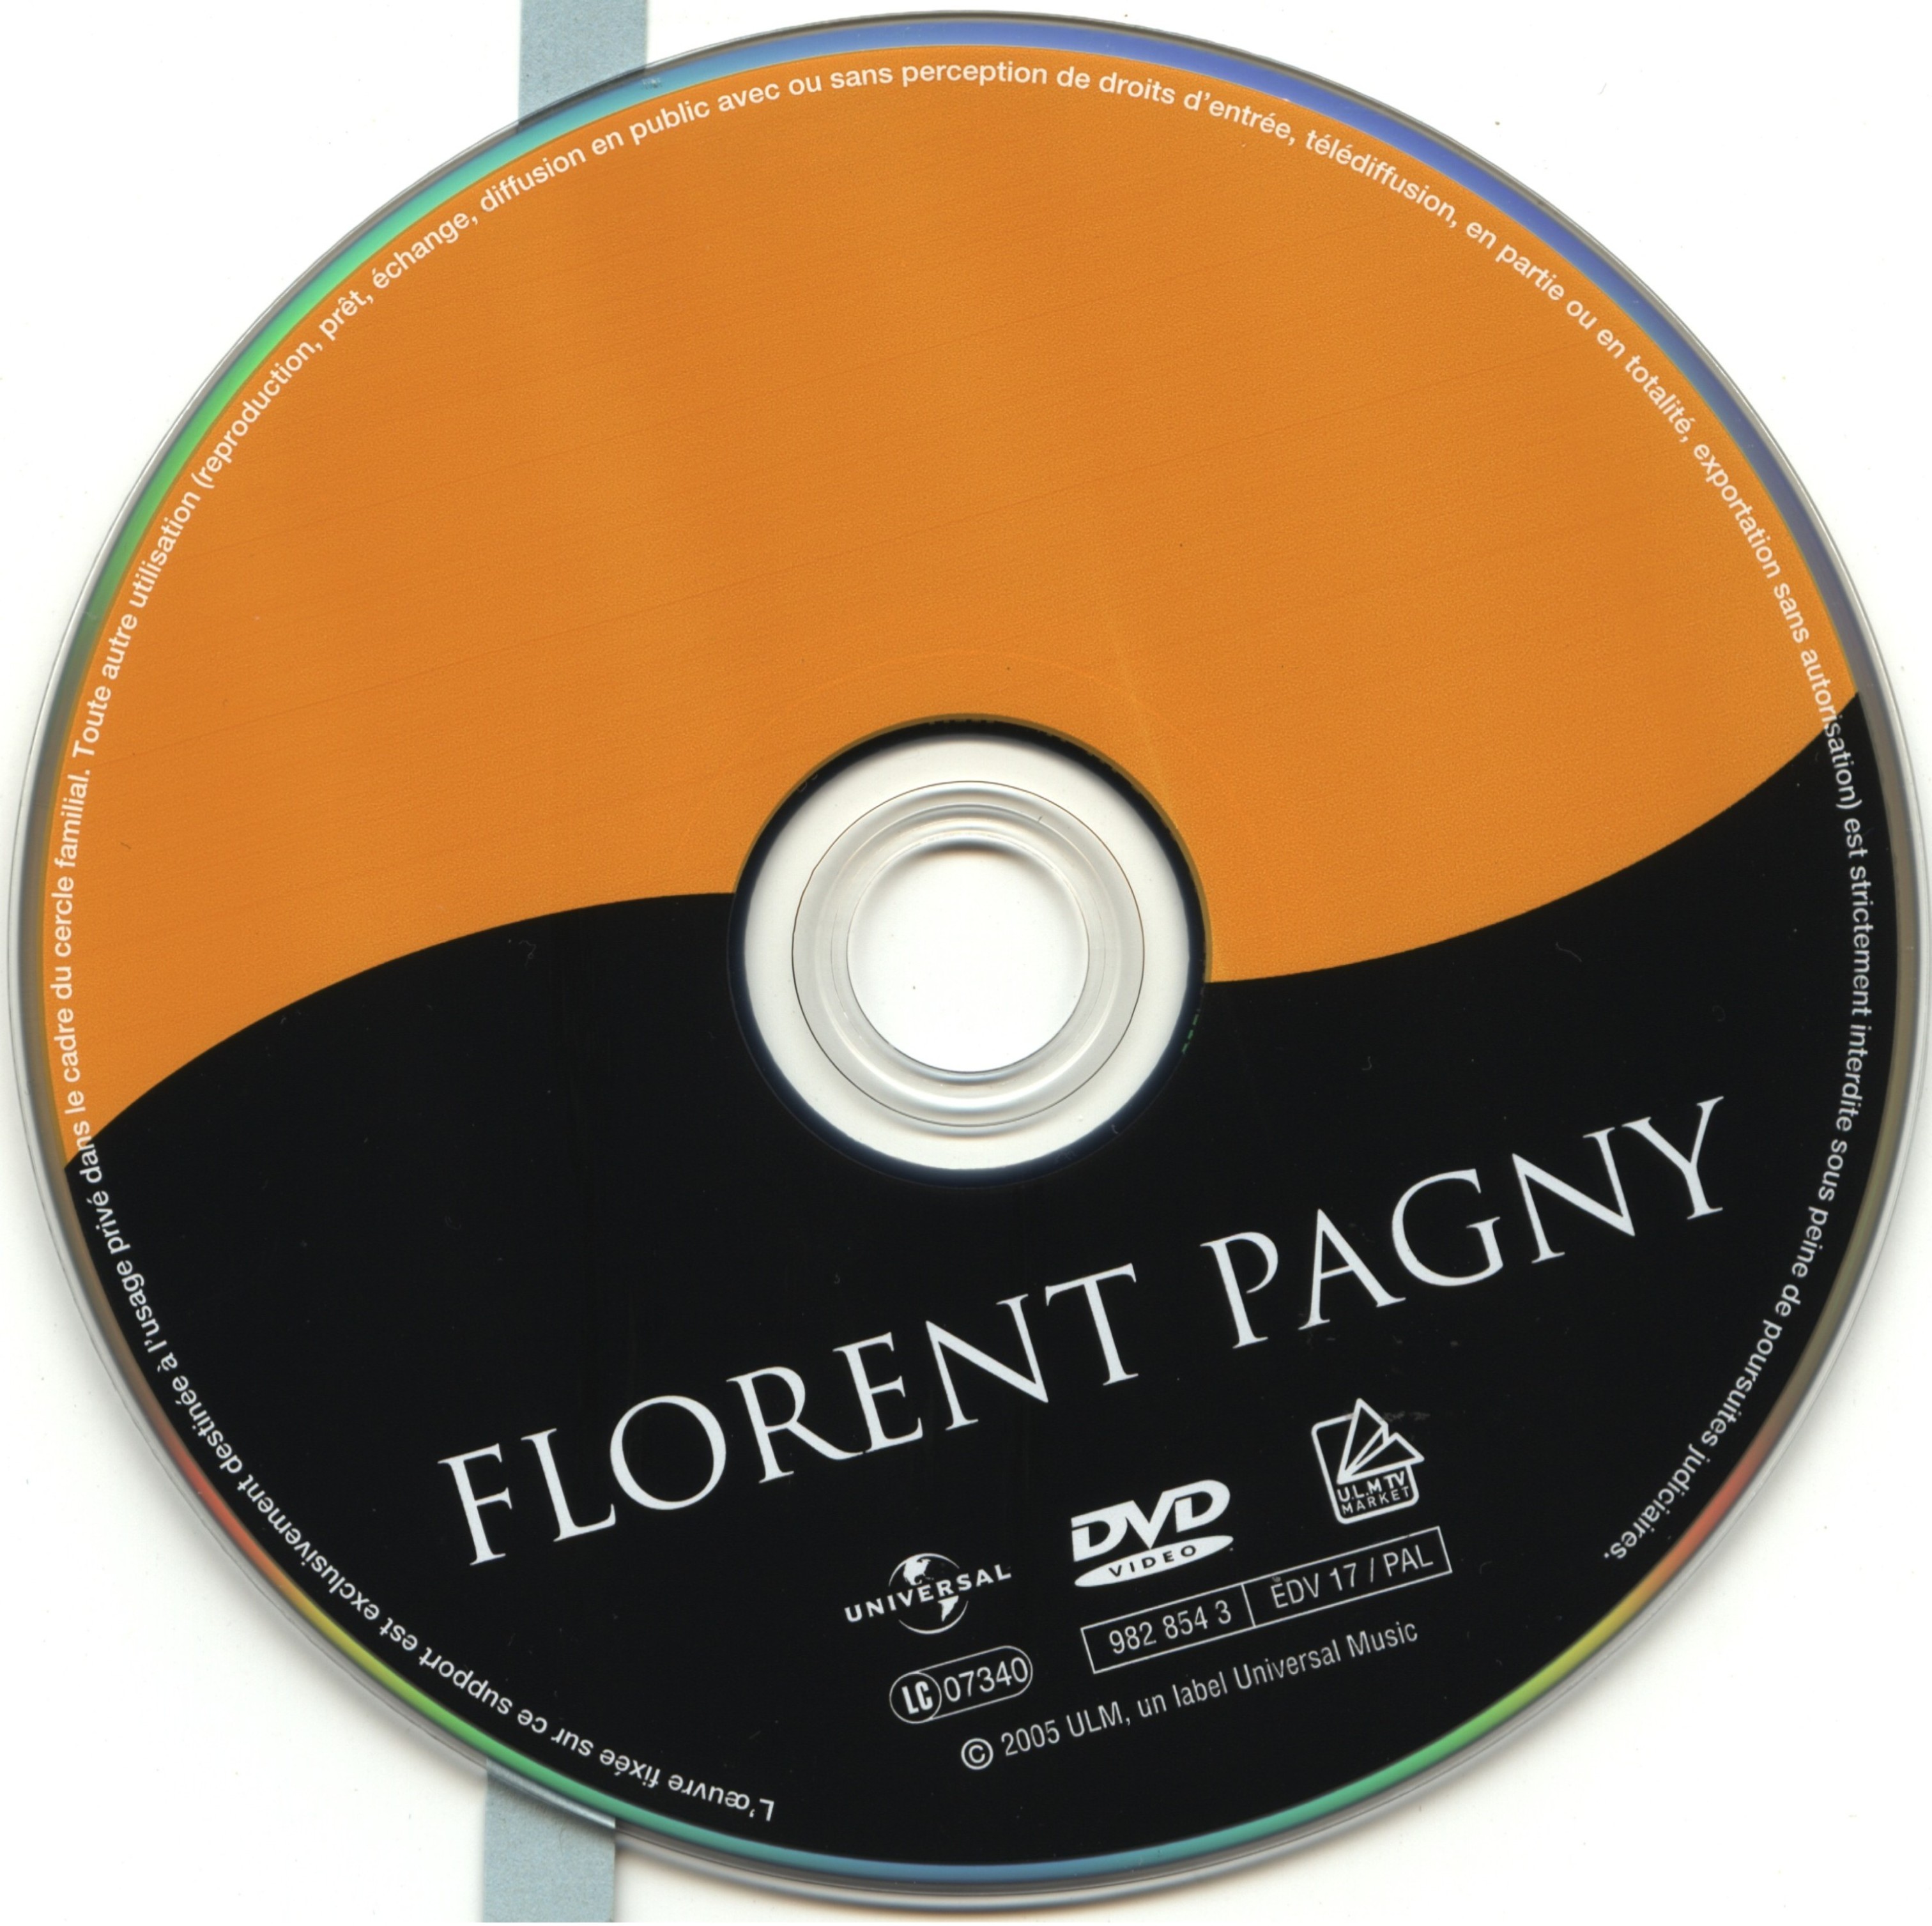 Florent Pagny Master Serie